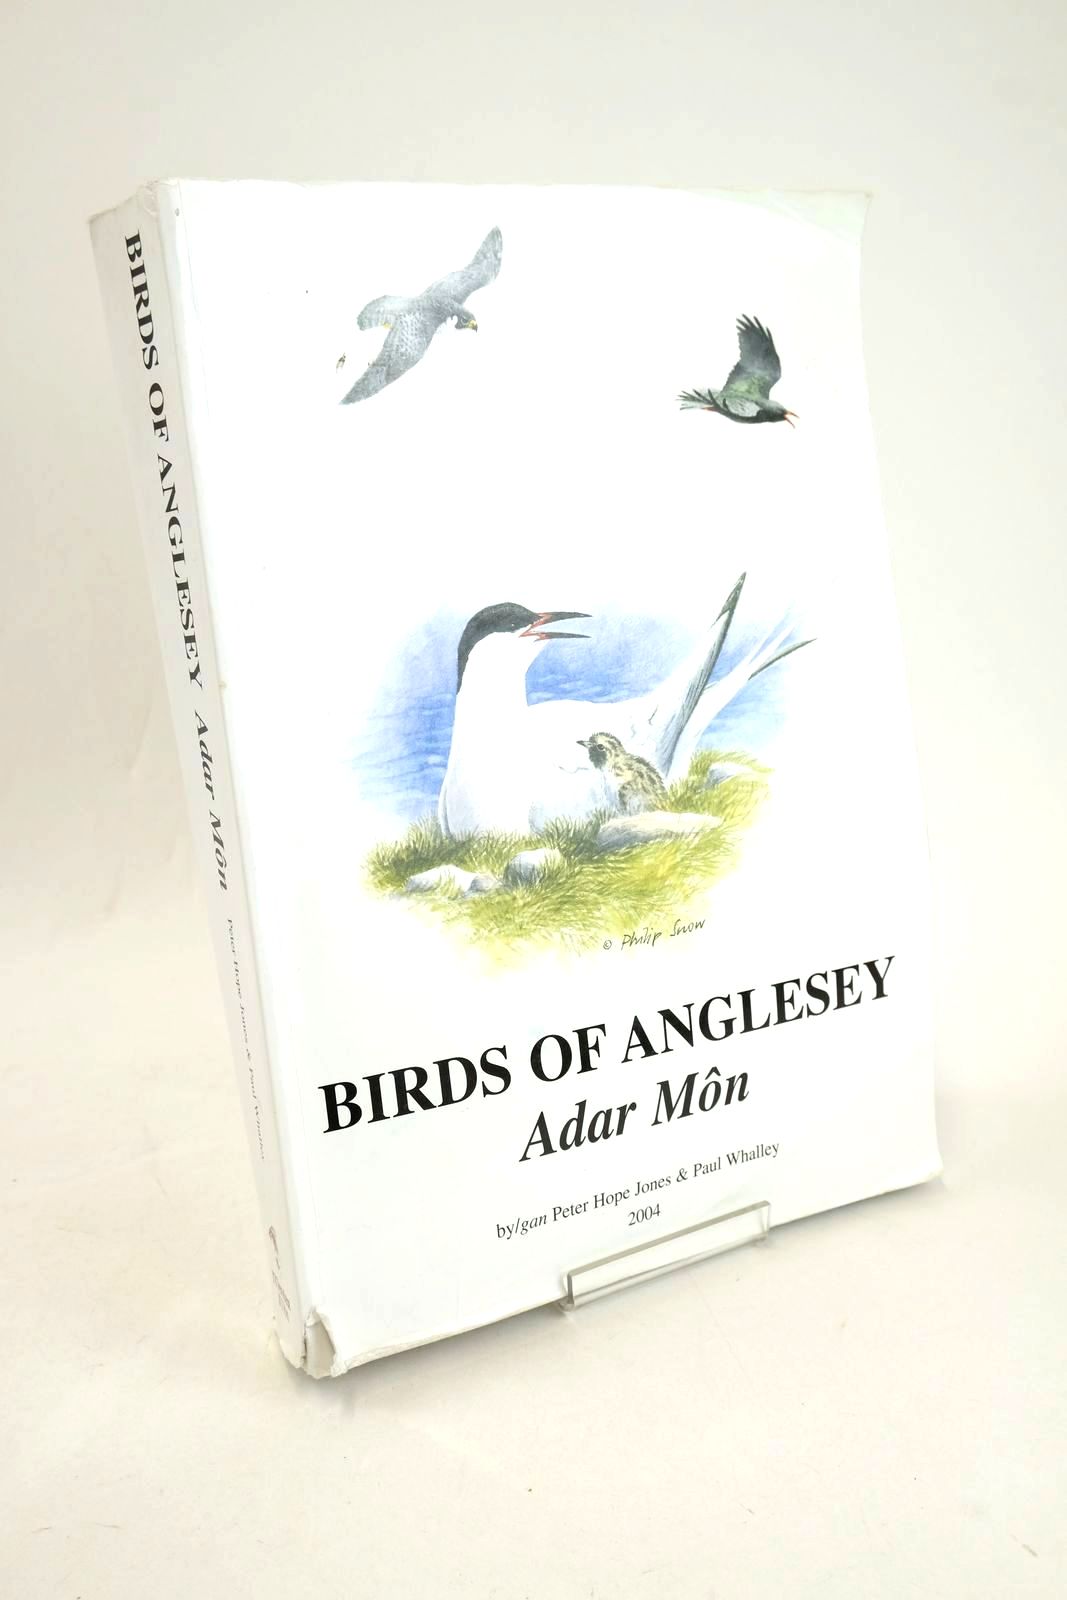 Photo of BIRDS OF ANGLESEY ADAR MON written by Jones, Peter Hope Whalley, Paul published by Menter Mon (STOCK CODE: 1327637)  for sale by Stella & Rose's Books